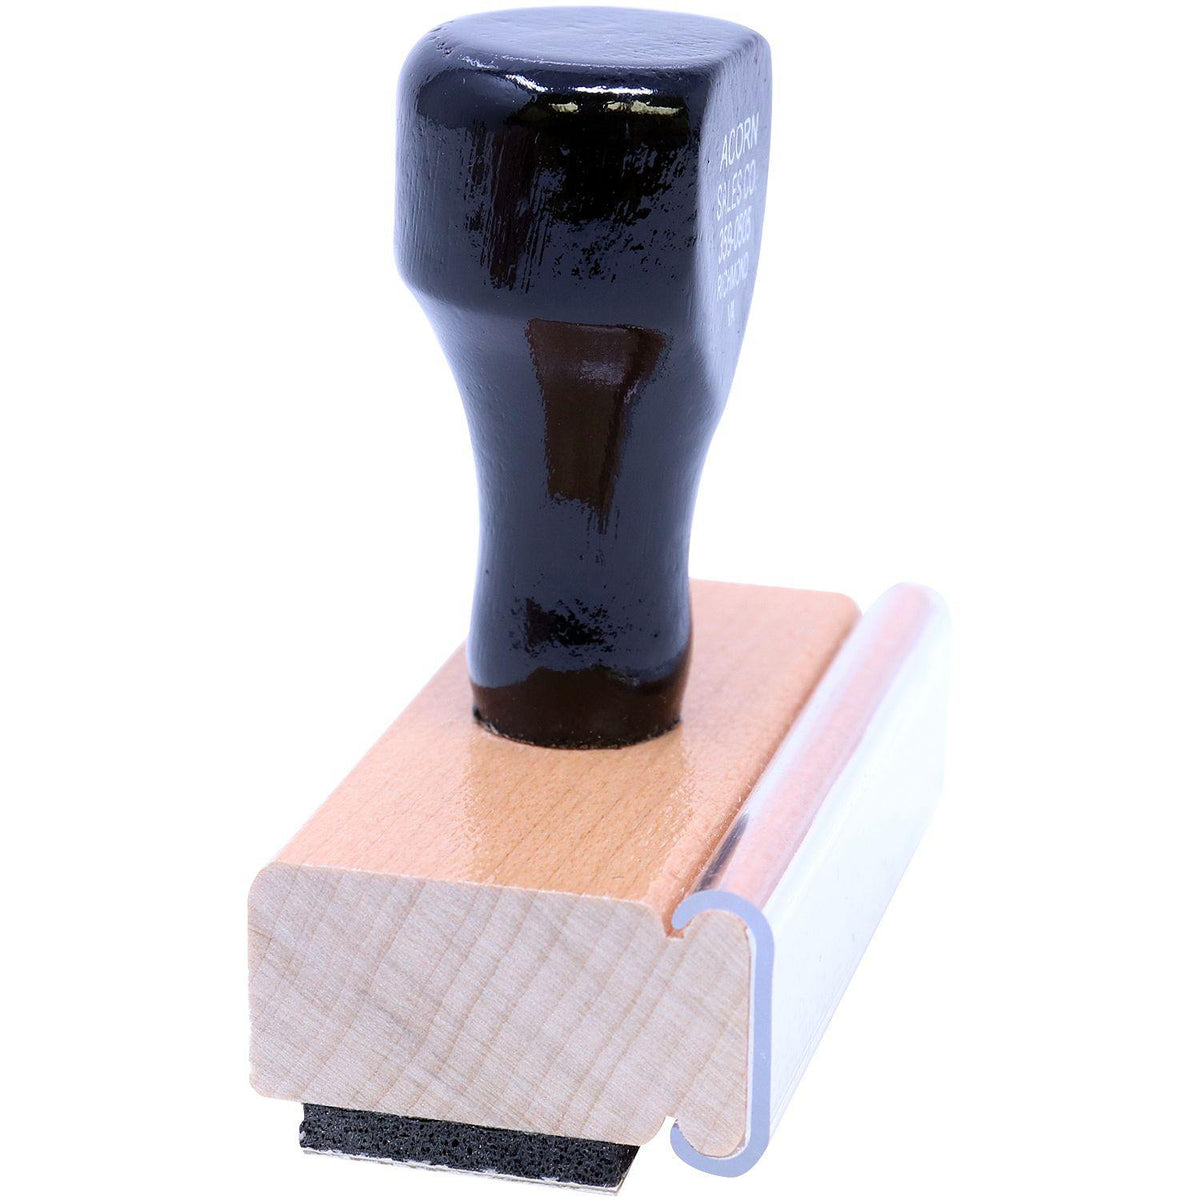 Side View of Borrador Rubber Stamp at an Angle